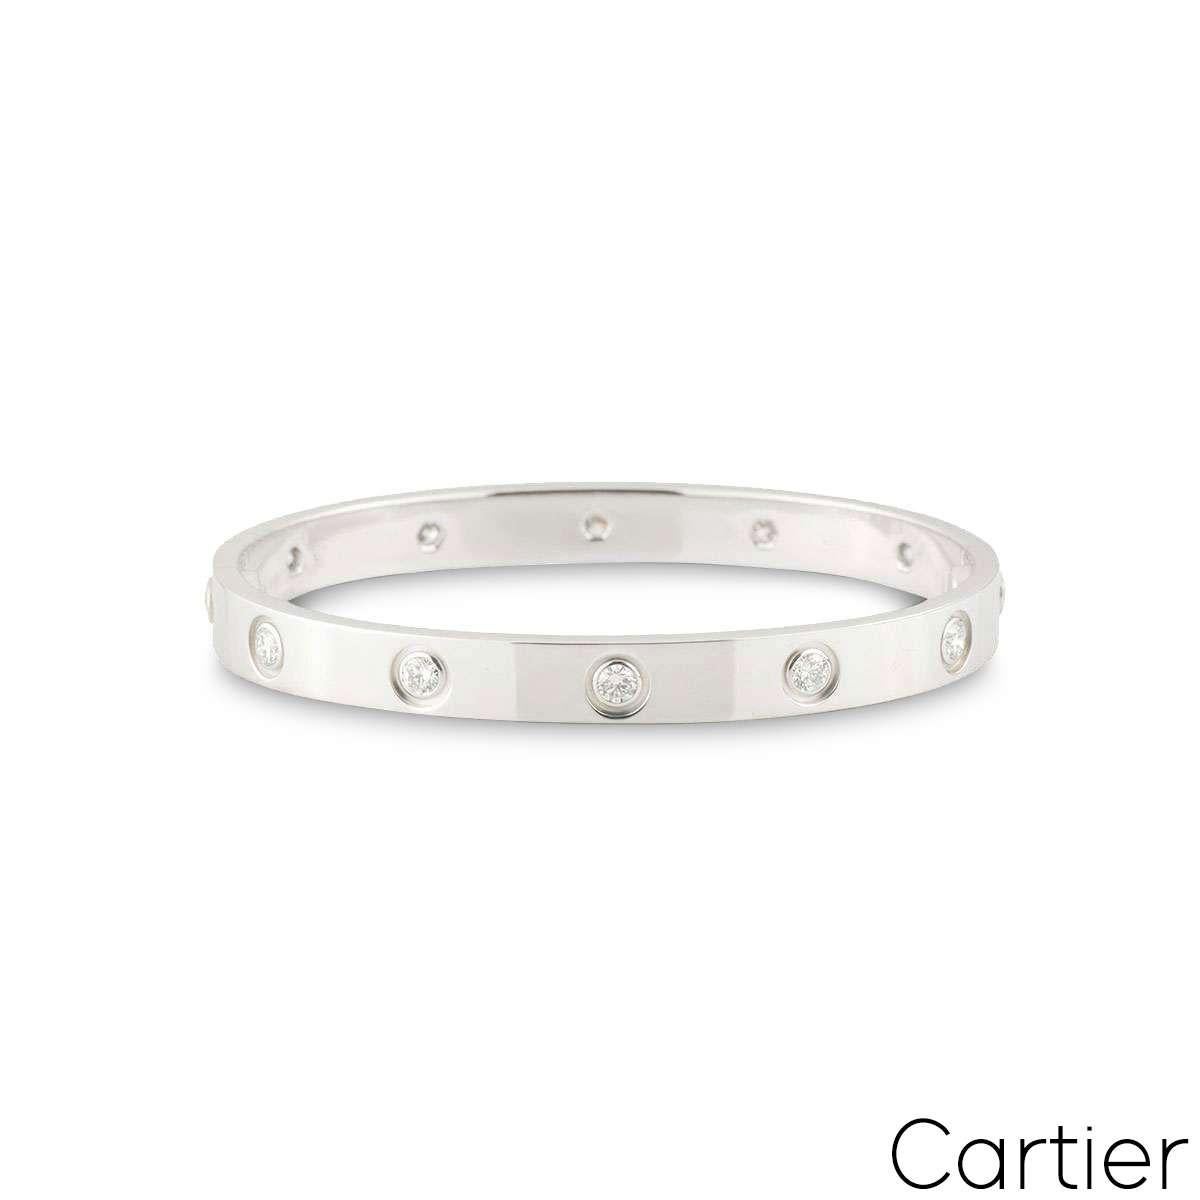 An 18k white gold full diamond Cartier bracelet from the Love collection. The bracelet is set with 10 round brilliant cut diamonds circulating the outer edge throughout in a rubover setting totalling 0.96ct. The bracelet is size 18 and features the